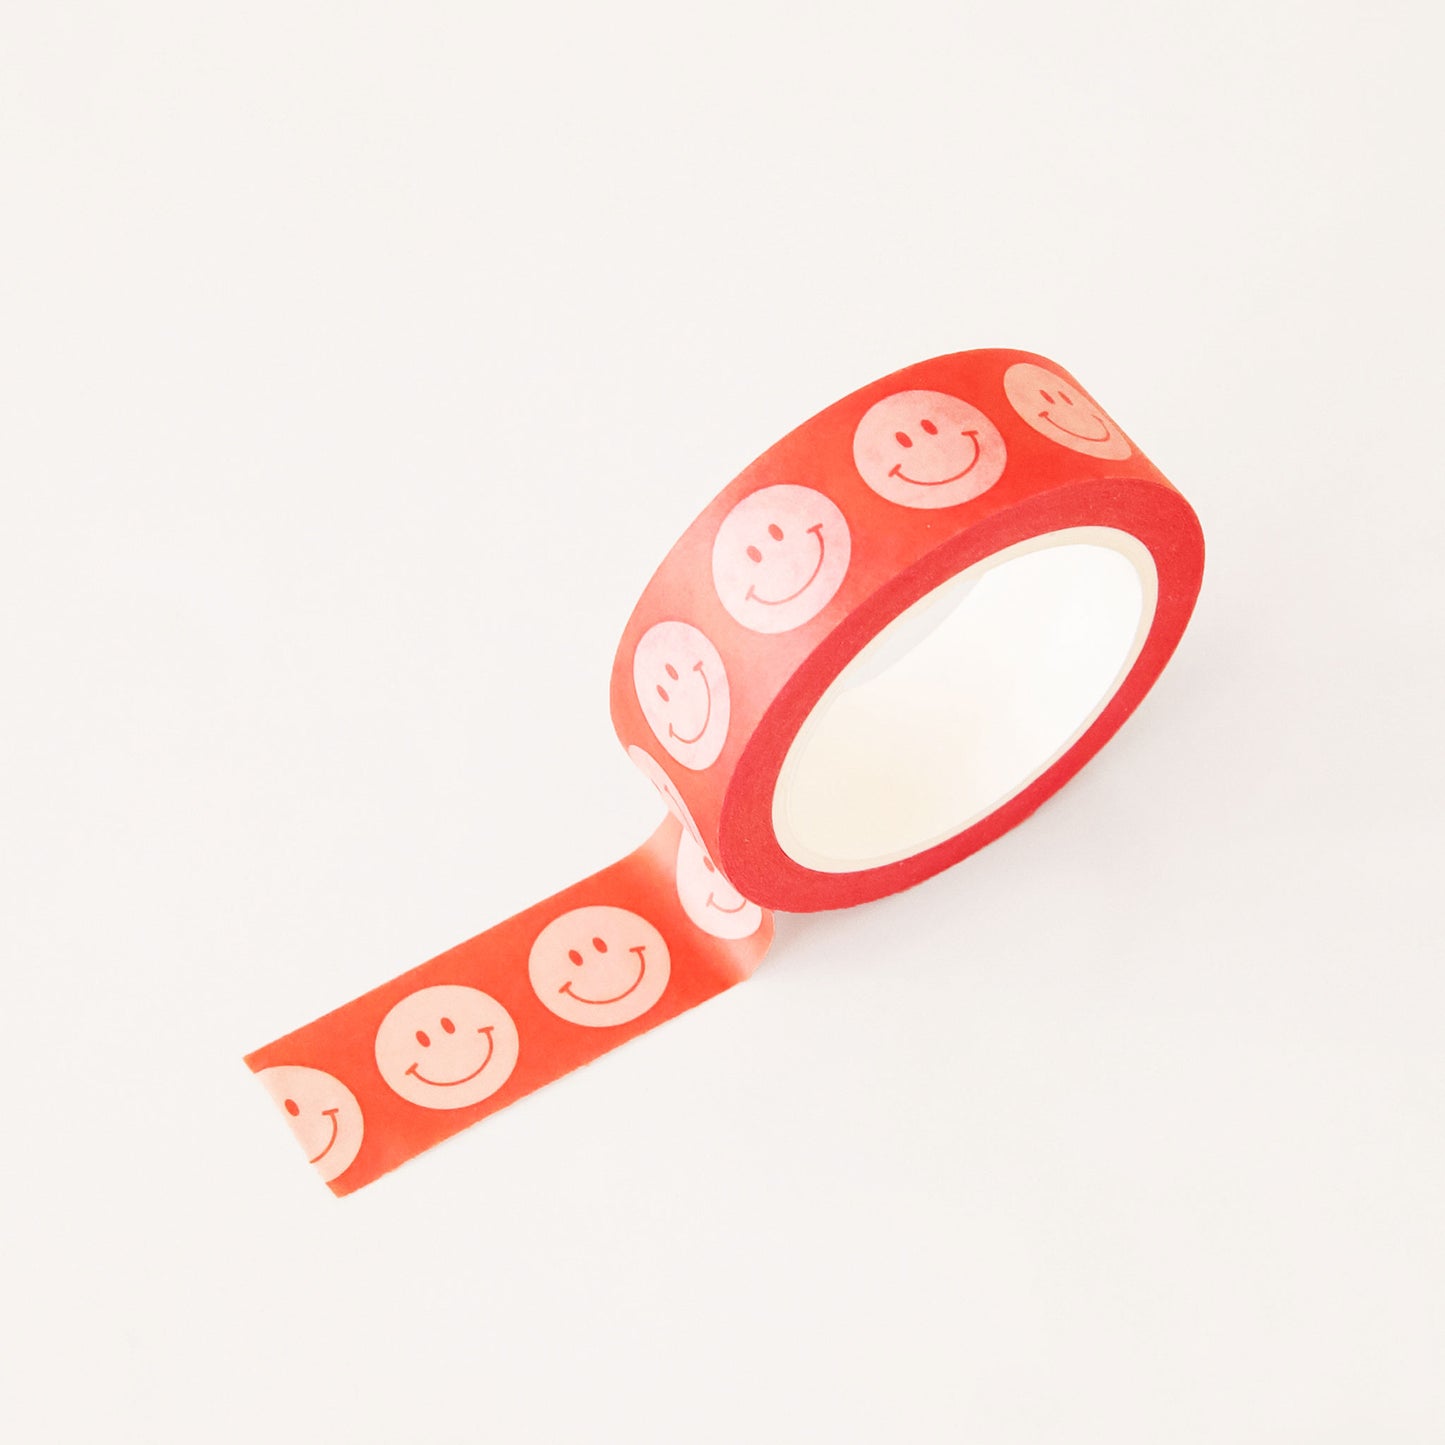 Roll of red washi tape covered in white classic smiley faces. The roll is position upright, partially unrolled.